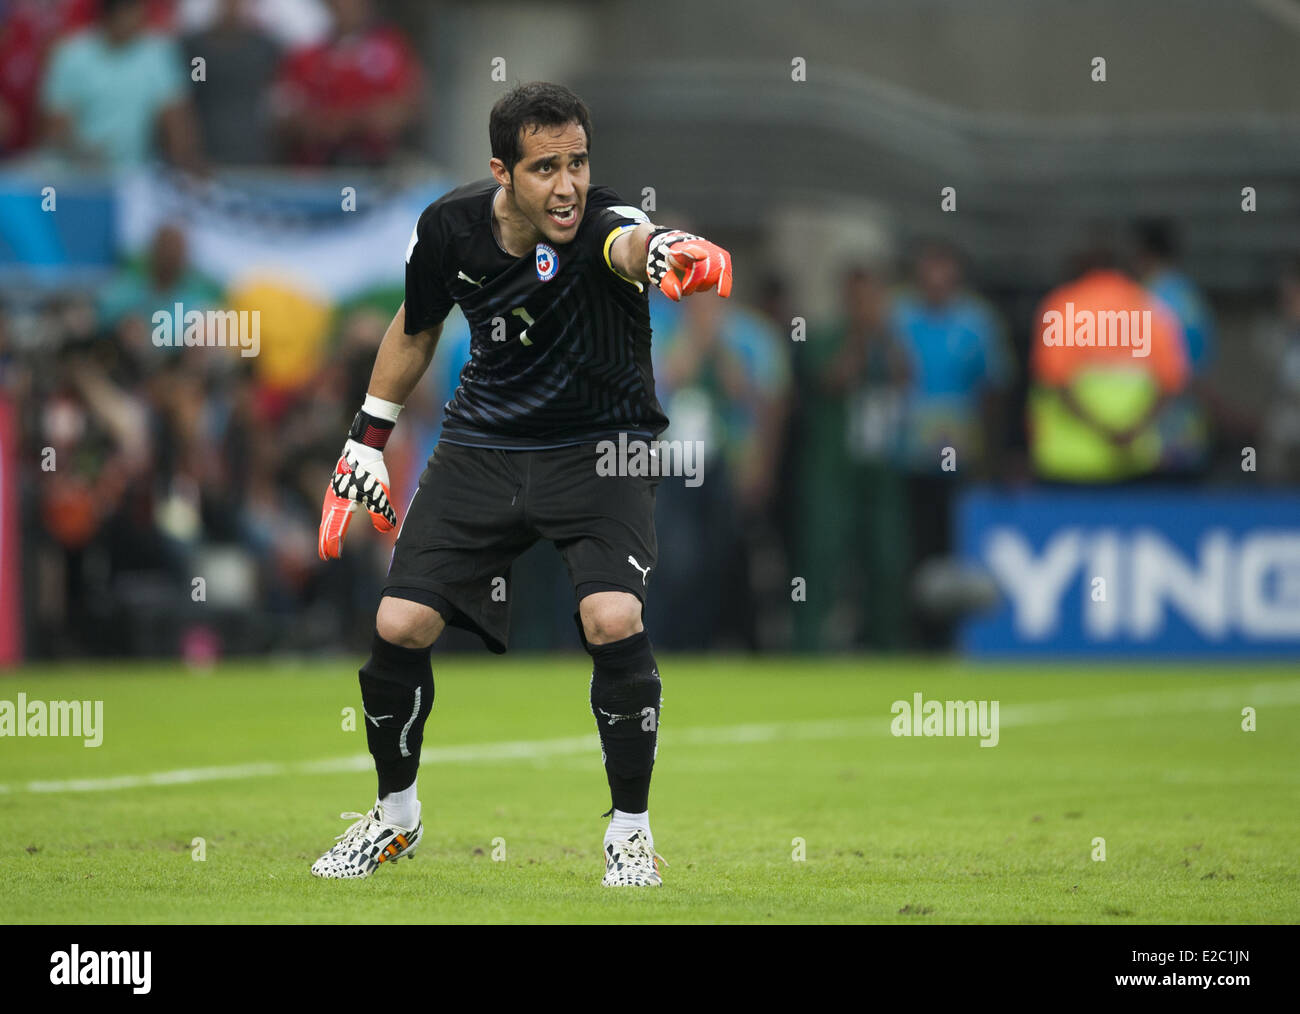 Porto Alegre, Brazil. 18th June, 2014.  Claudio Bravo in the match between Spain and Chile in the group stage of the 2014 World Cup, for the group B match at the Beira Rio stadium, on June 18, 2014  Credit:  Urbanandsport/NurPhoto/ZUMAPRESS.com/Alamy Live News Stock Photo